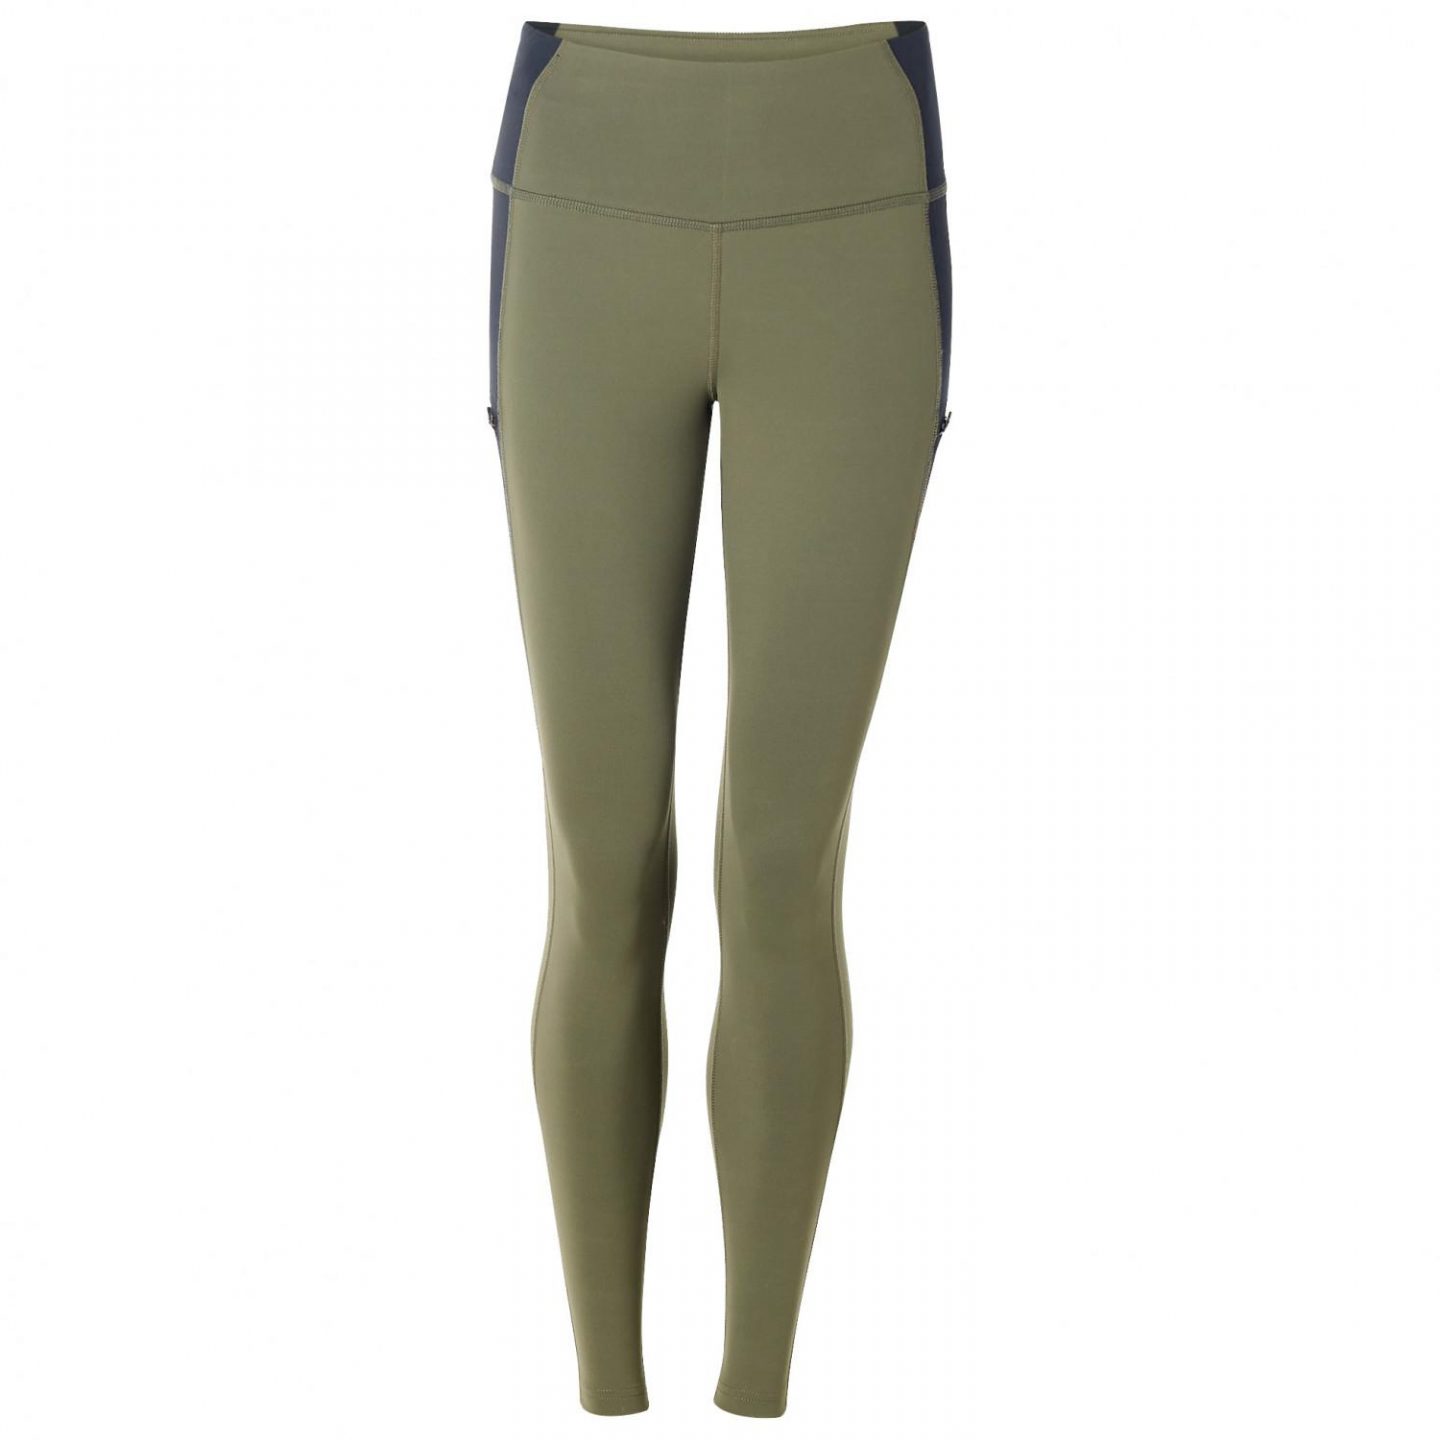 The best hiking trousers and trekking tights for women